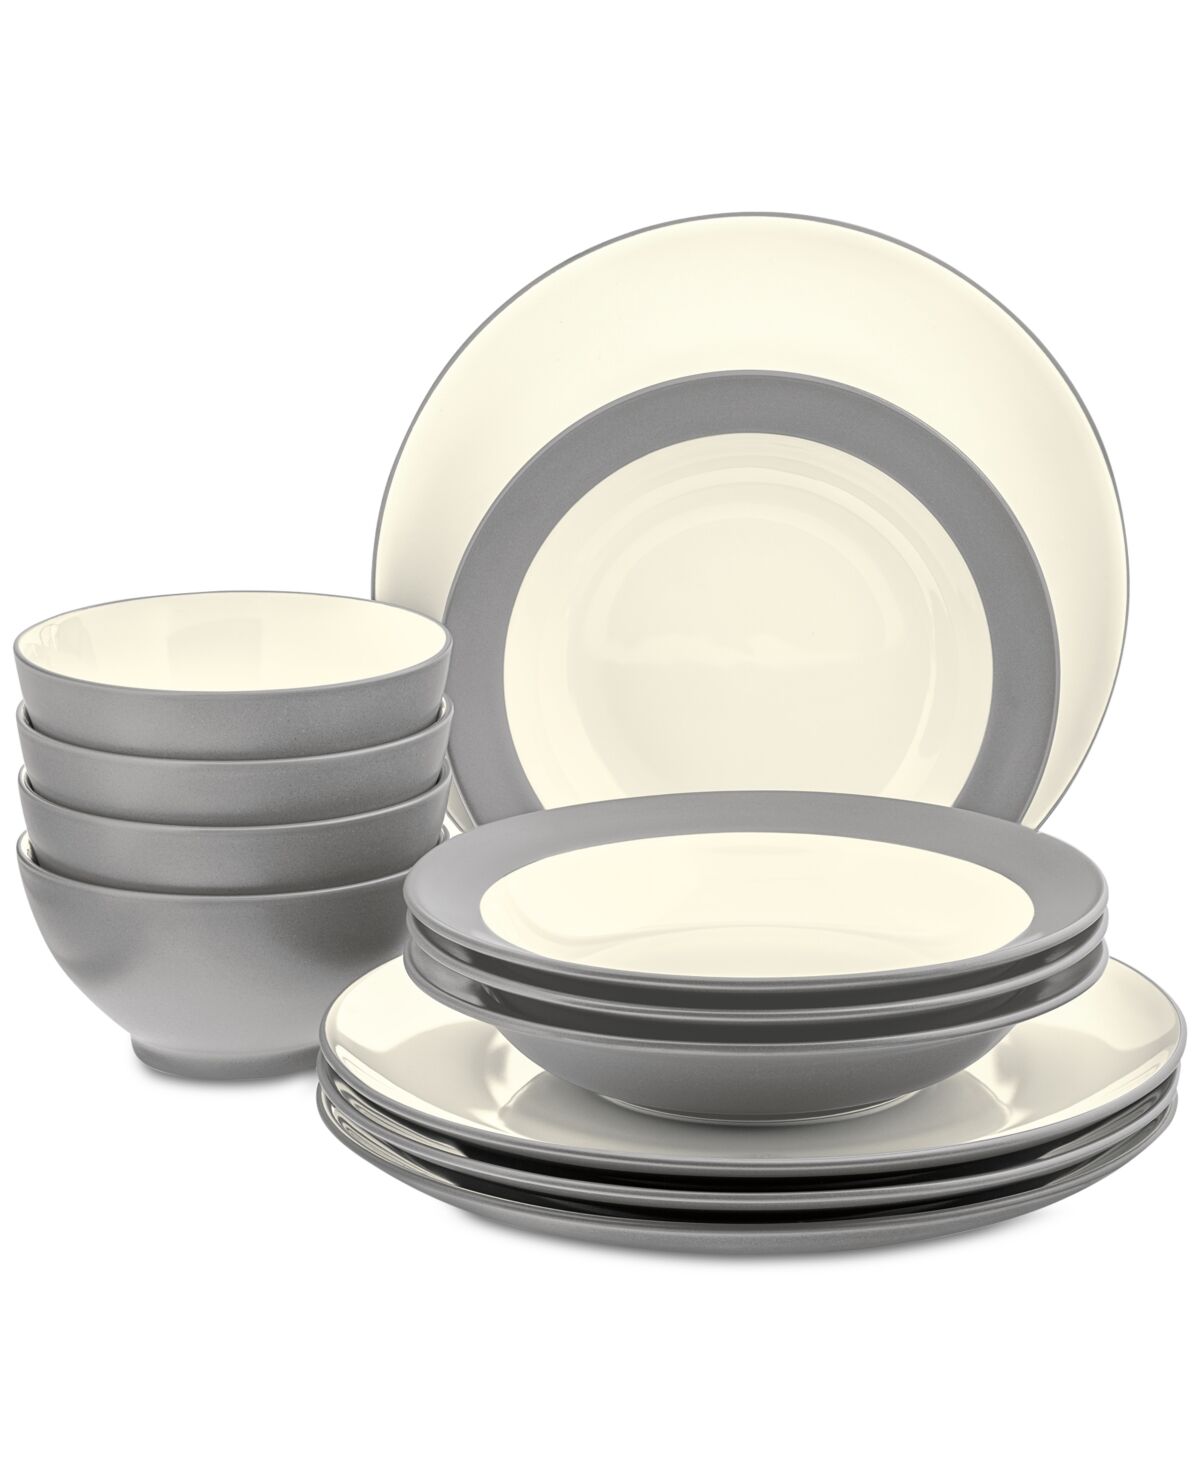 Noritake Colorwave Coupe 12-Piece Dinnerware Set, Service for 4, Created for Macy's - Slate